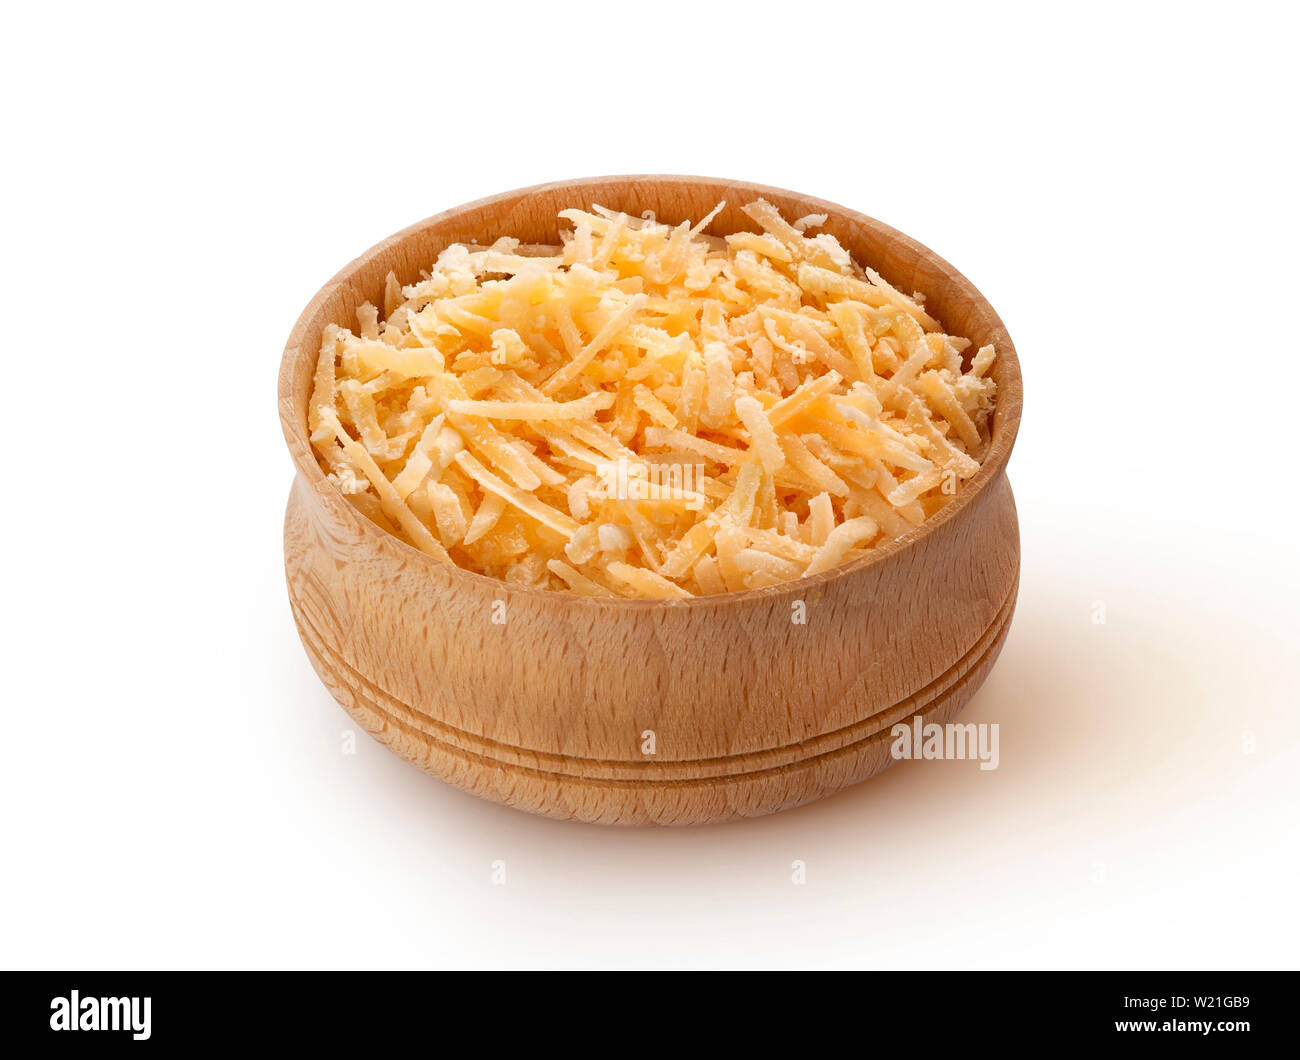 Container Filled Grated Cheese Some Chunks Stock Photo 197141111